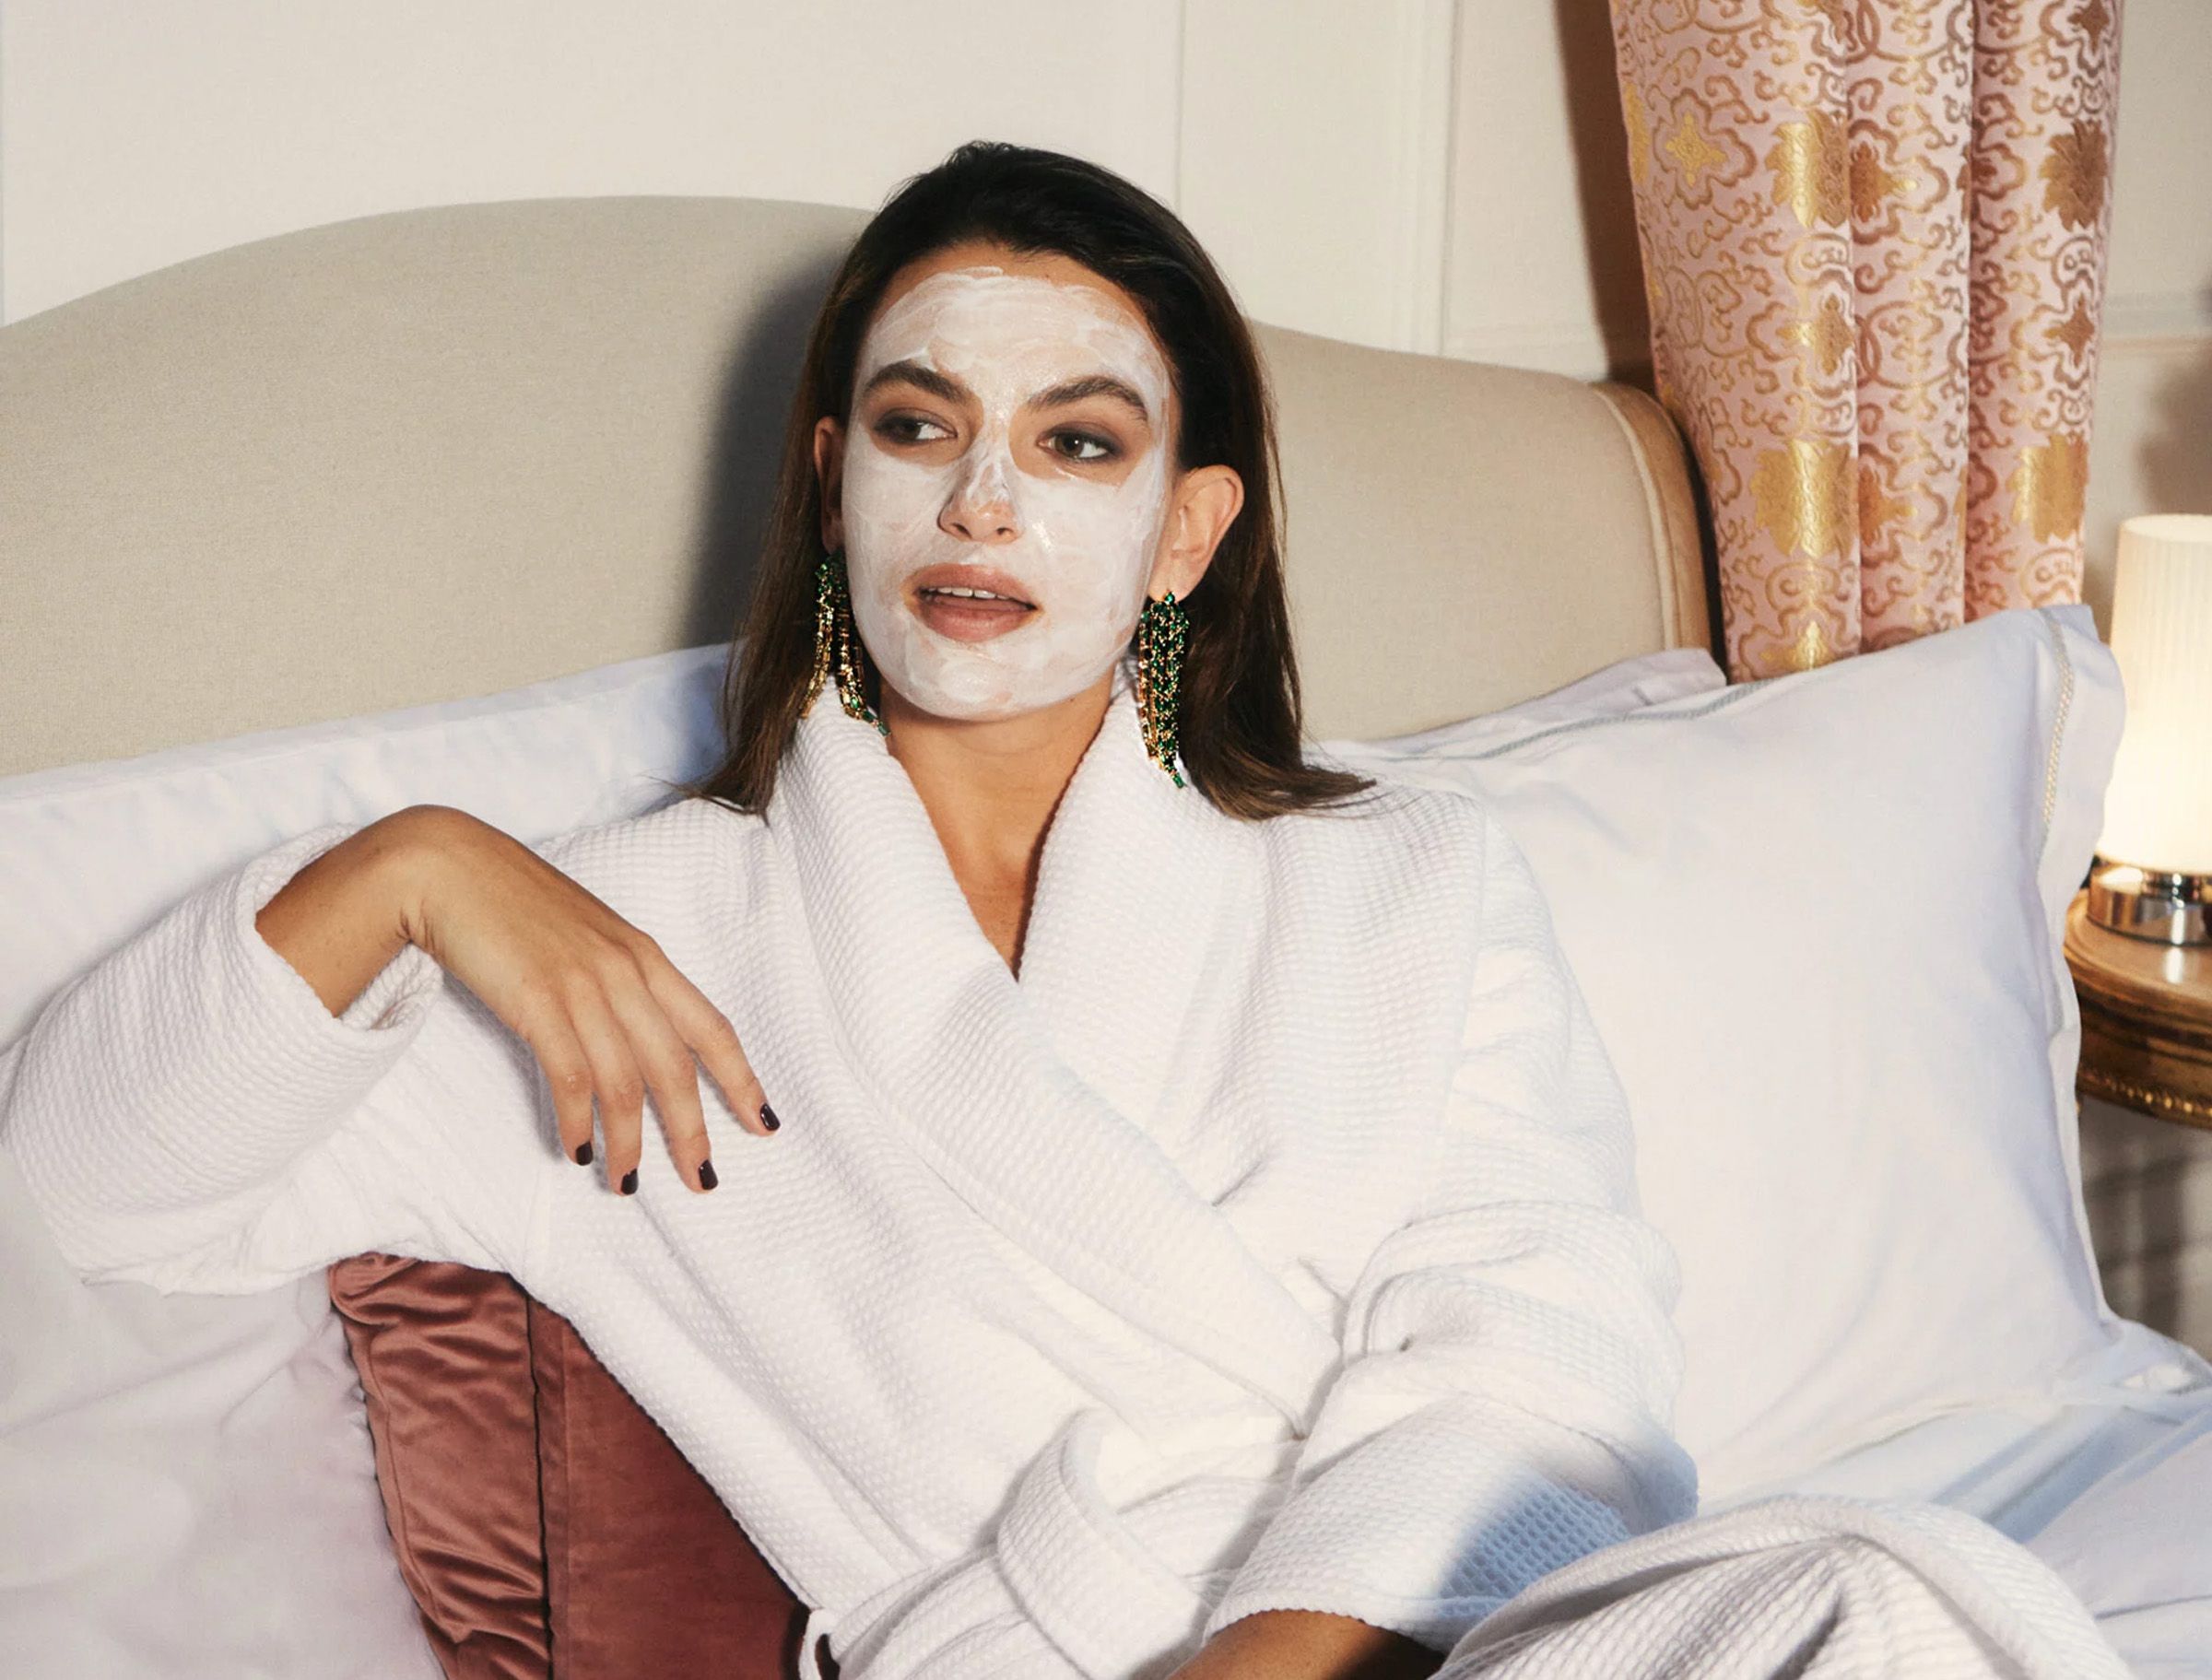 Products for the perfect at-home facial